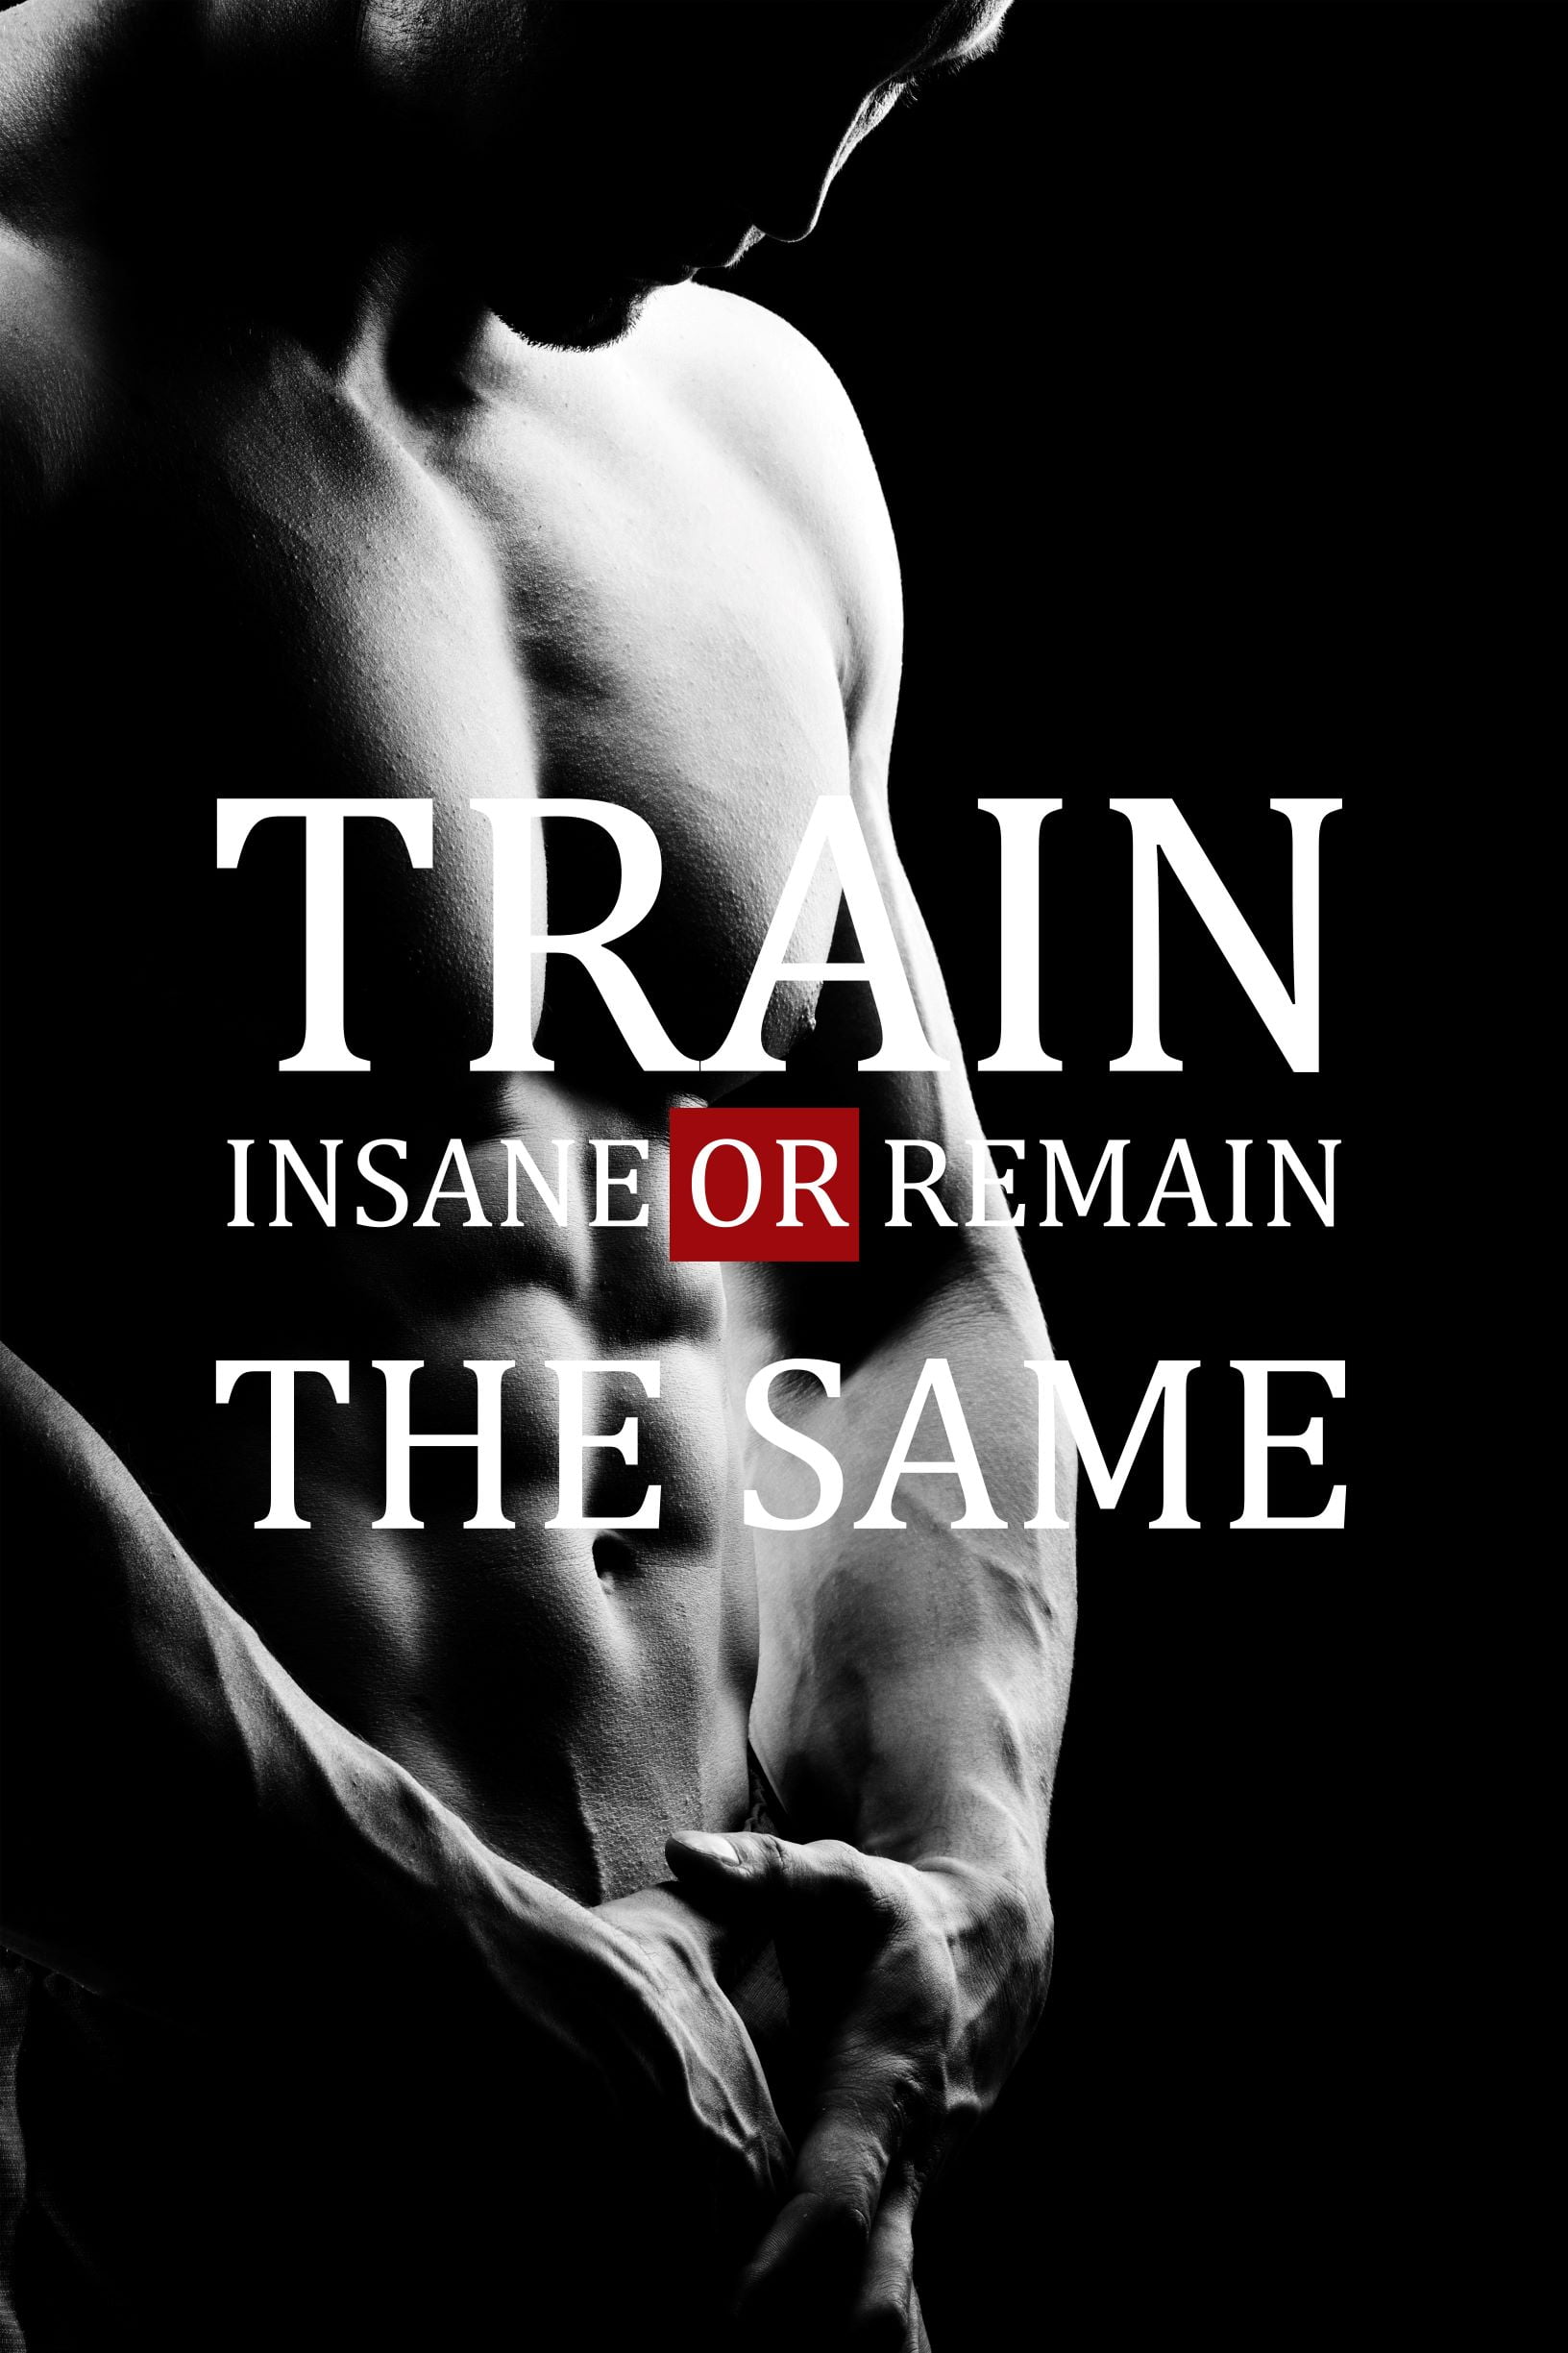 Motivational Body Building Quotes Exercise Art Hot 24x36in Poster N3319 